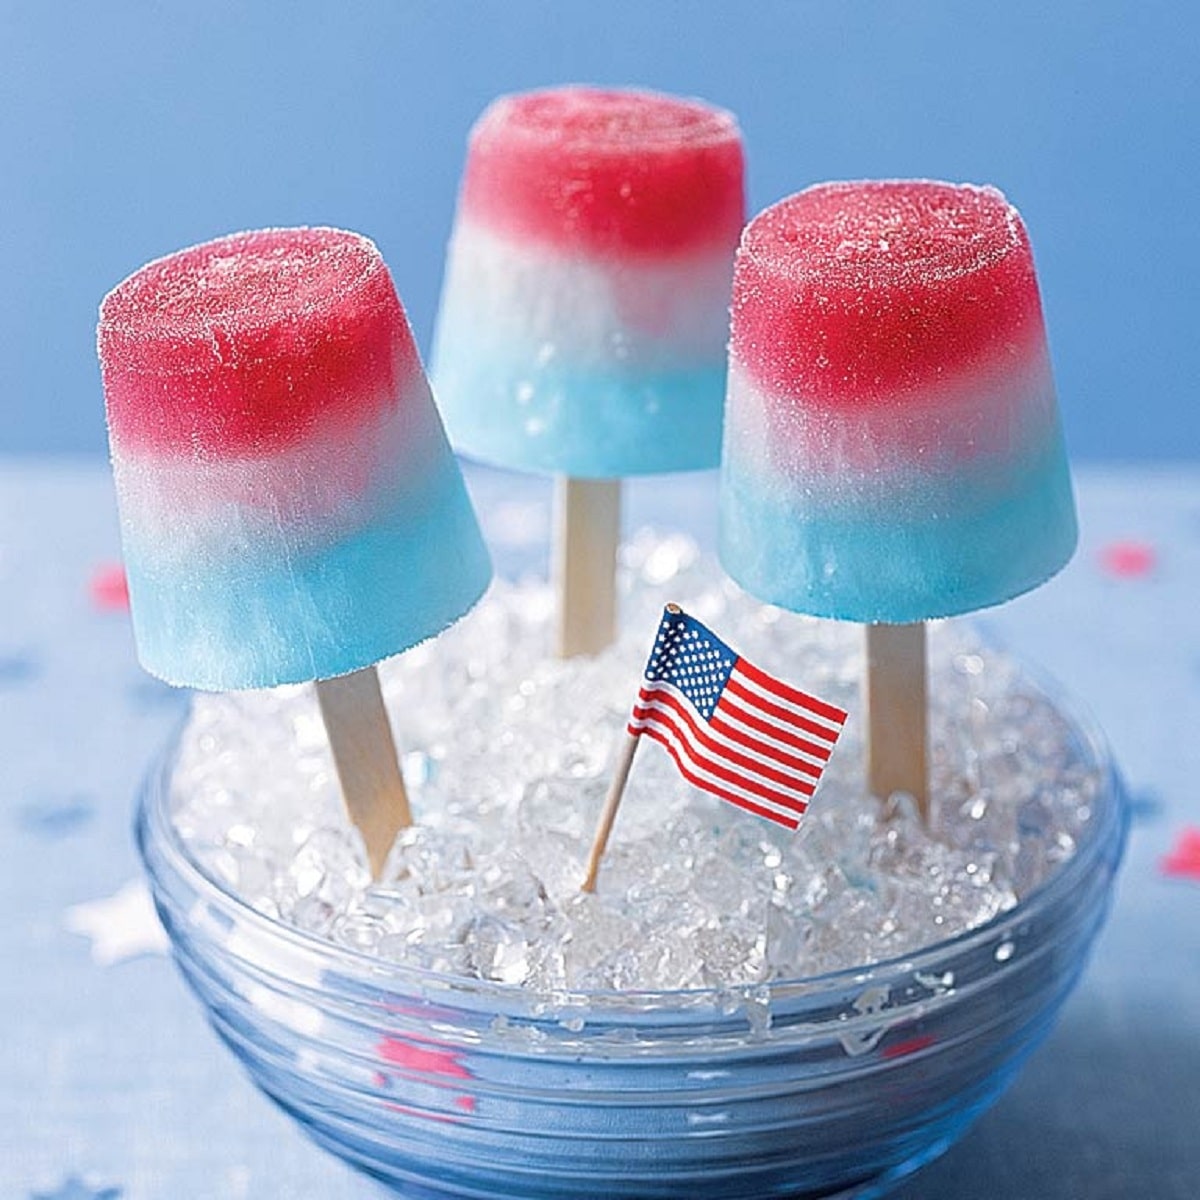 Red white and blue ice pops in ice in blue bowl with mini flag in ice